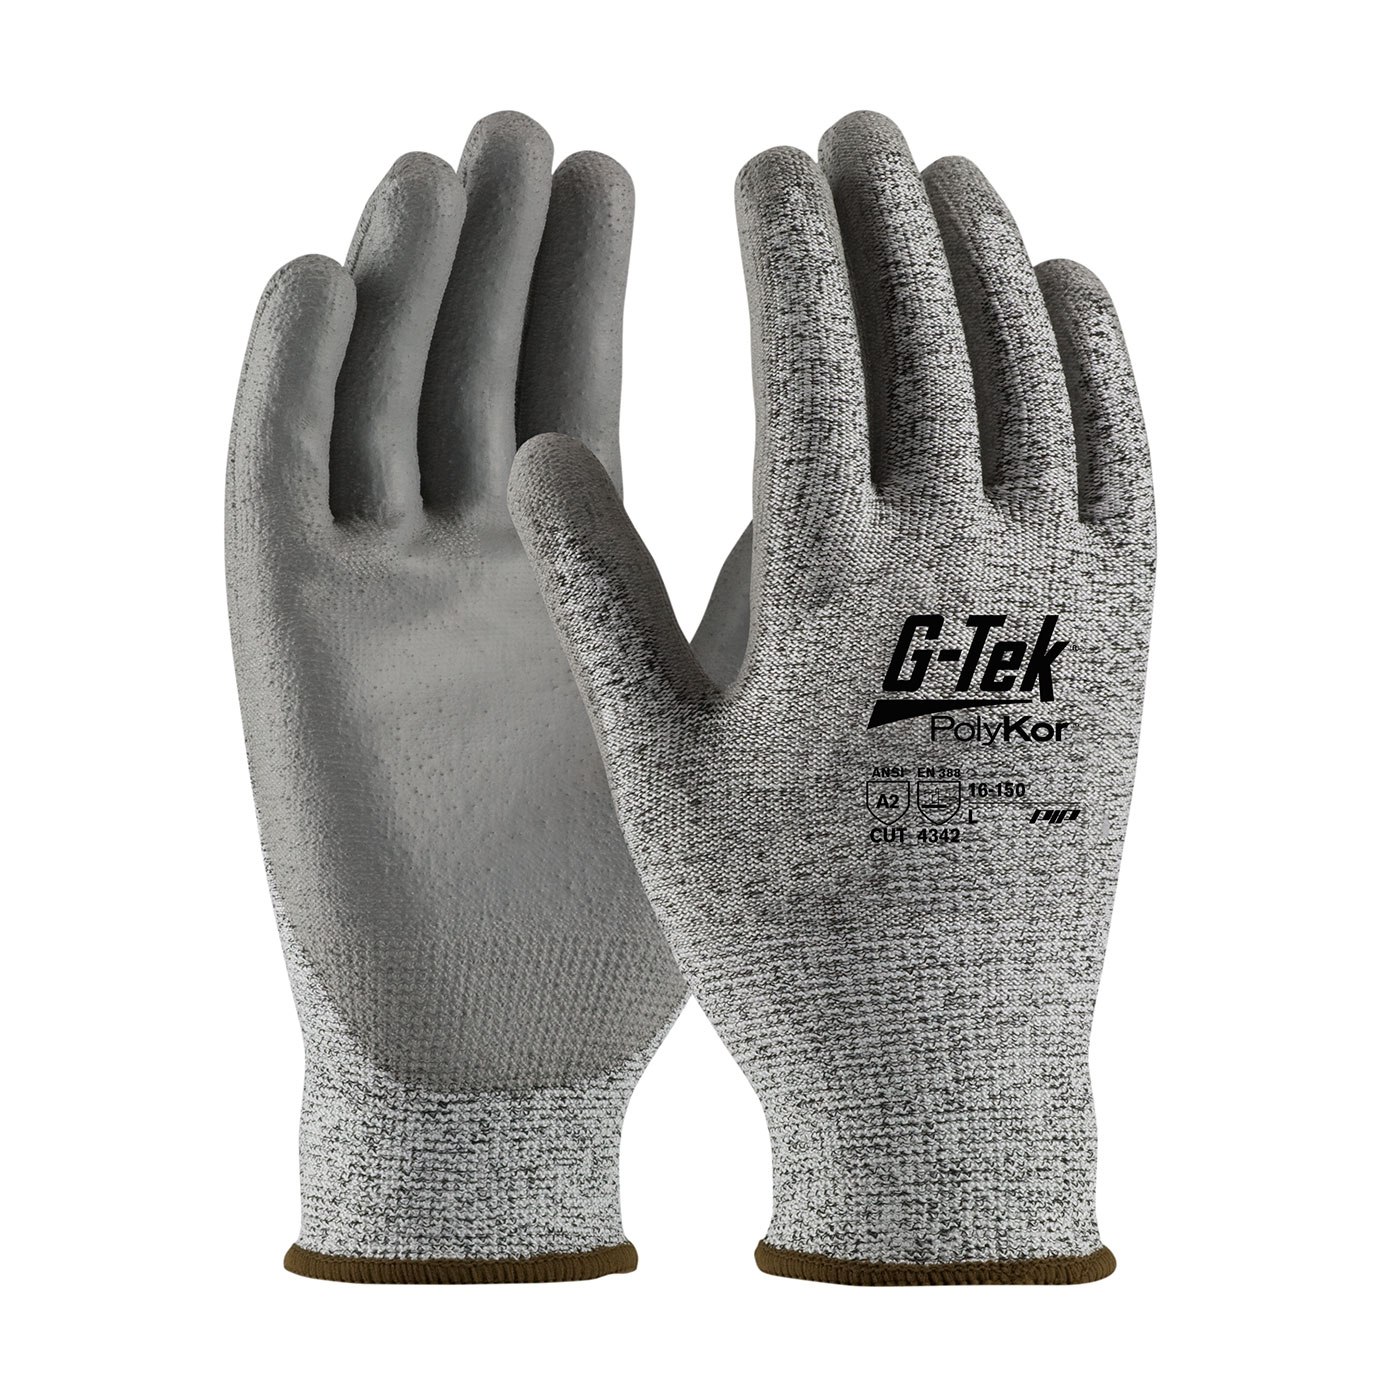 PIP 16-150/M G-Tek PolyKor Seamless Knit PolyKor Blended Glove with Polyurethane Coated Smooth Grip on Palm & Fingers - Medium PID-16 150 M